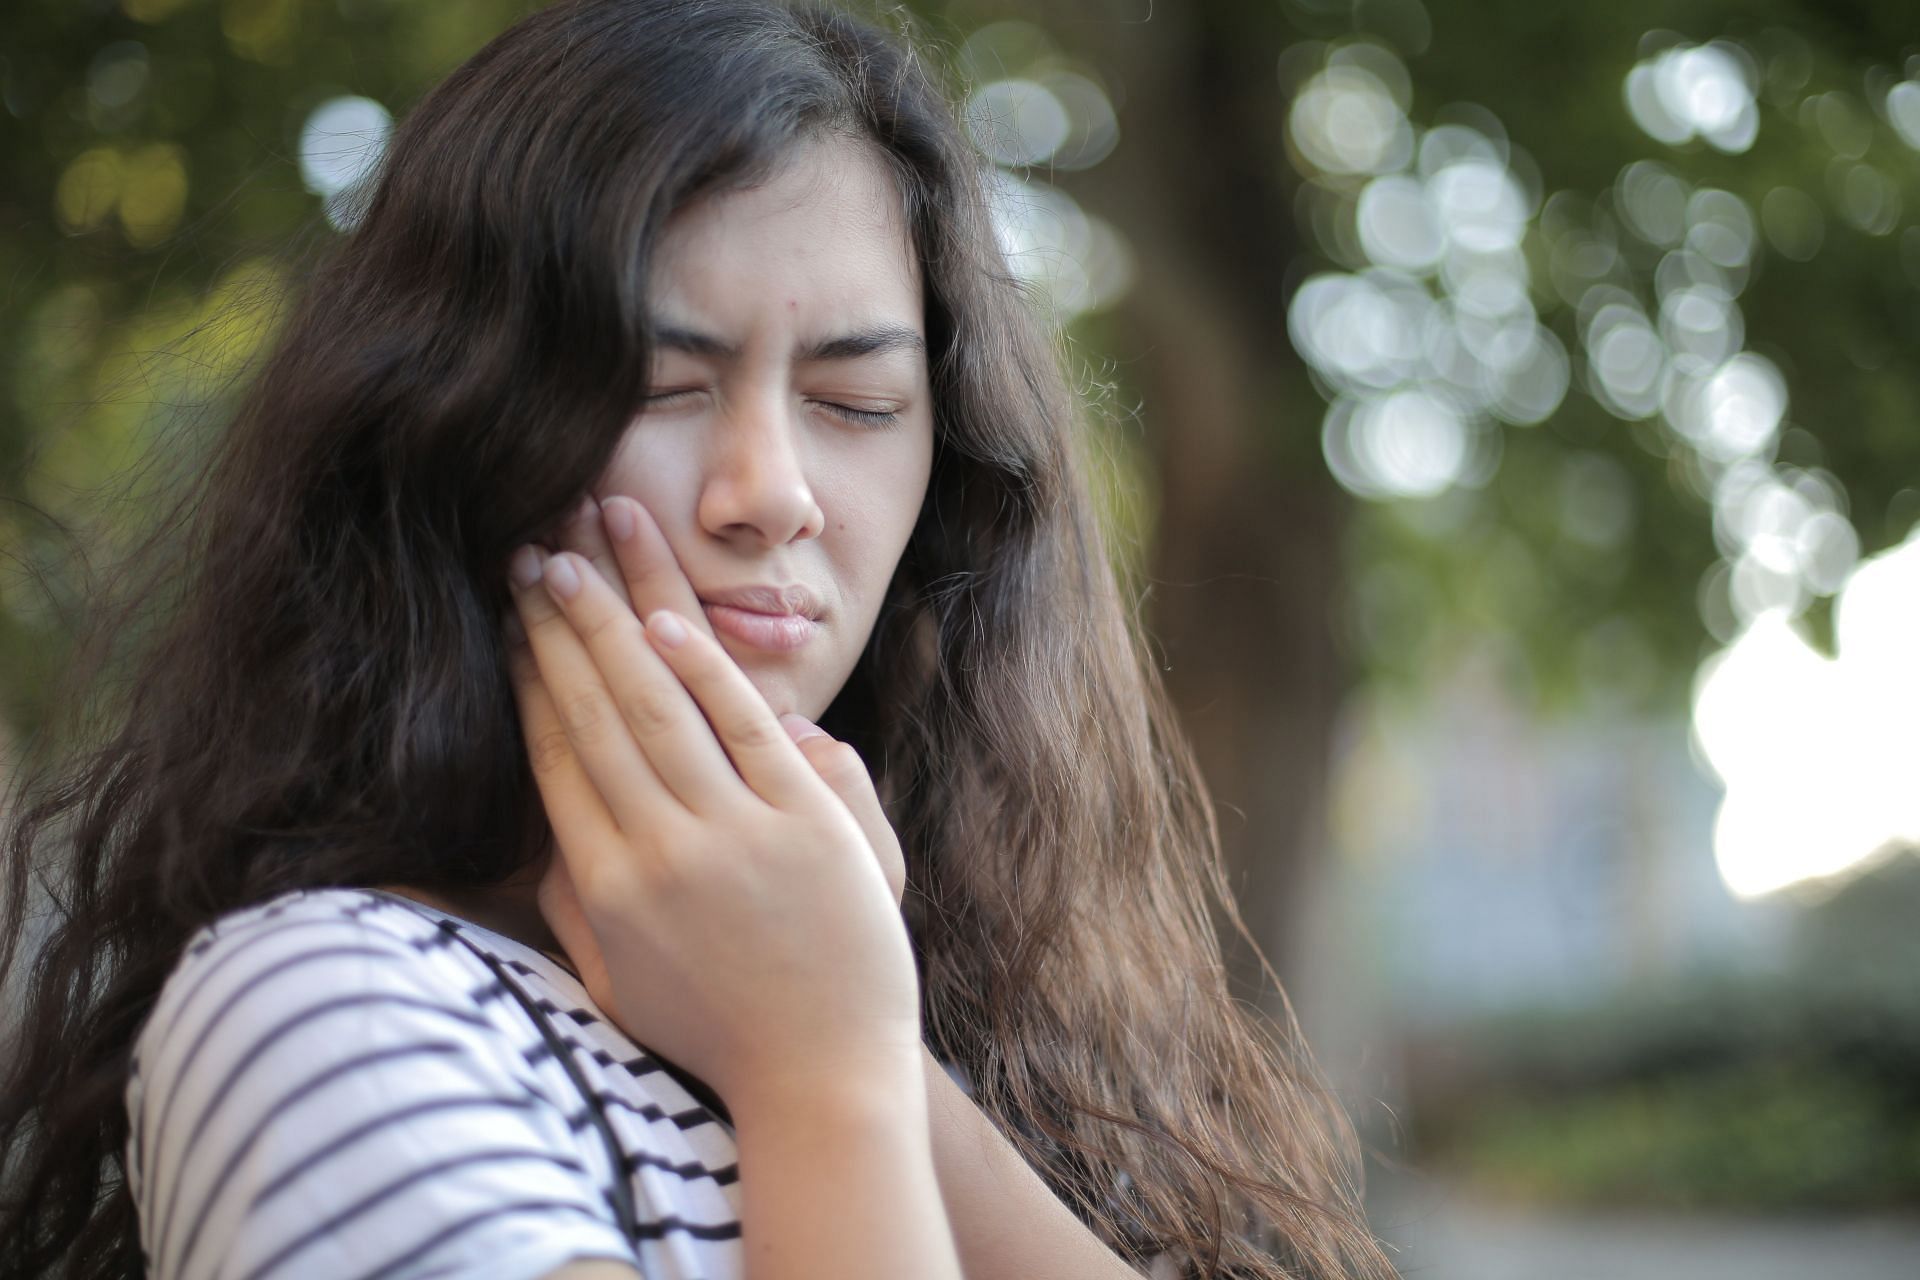 Toothache can be extremely painful. (Image via Pexels/ Andrea Piacquadio)